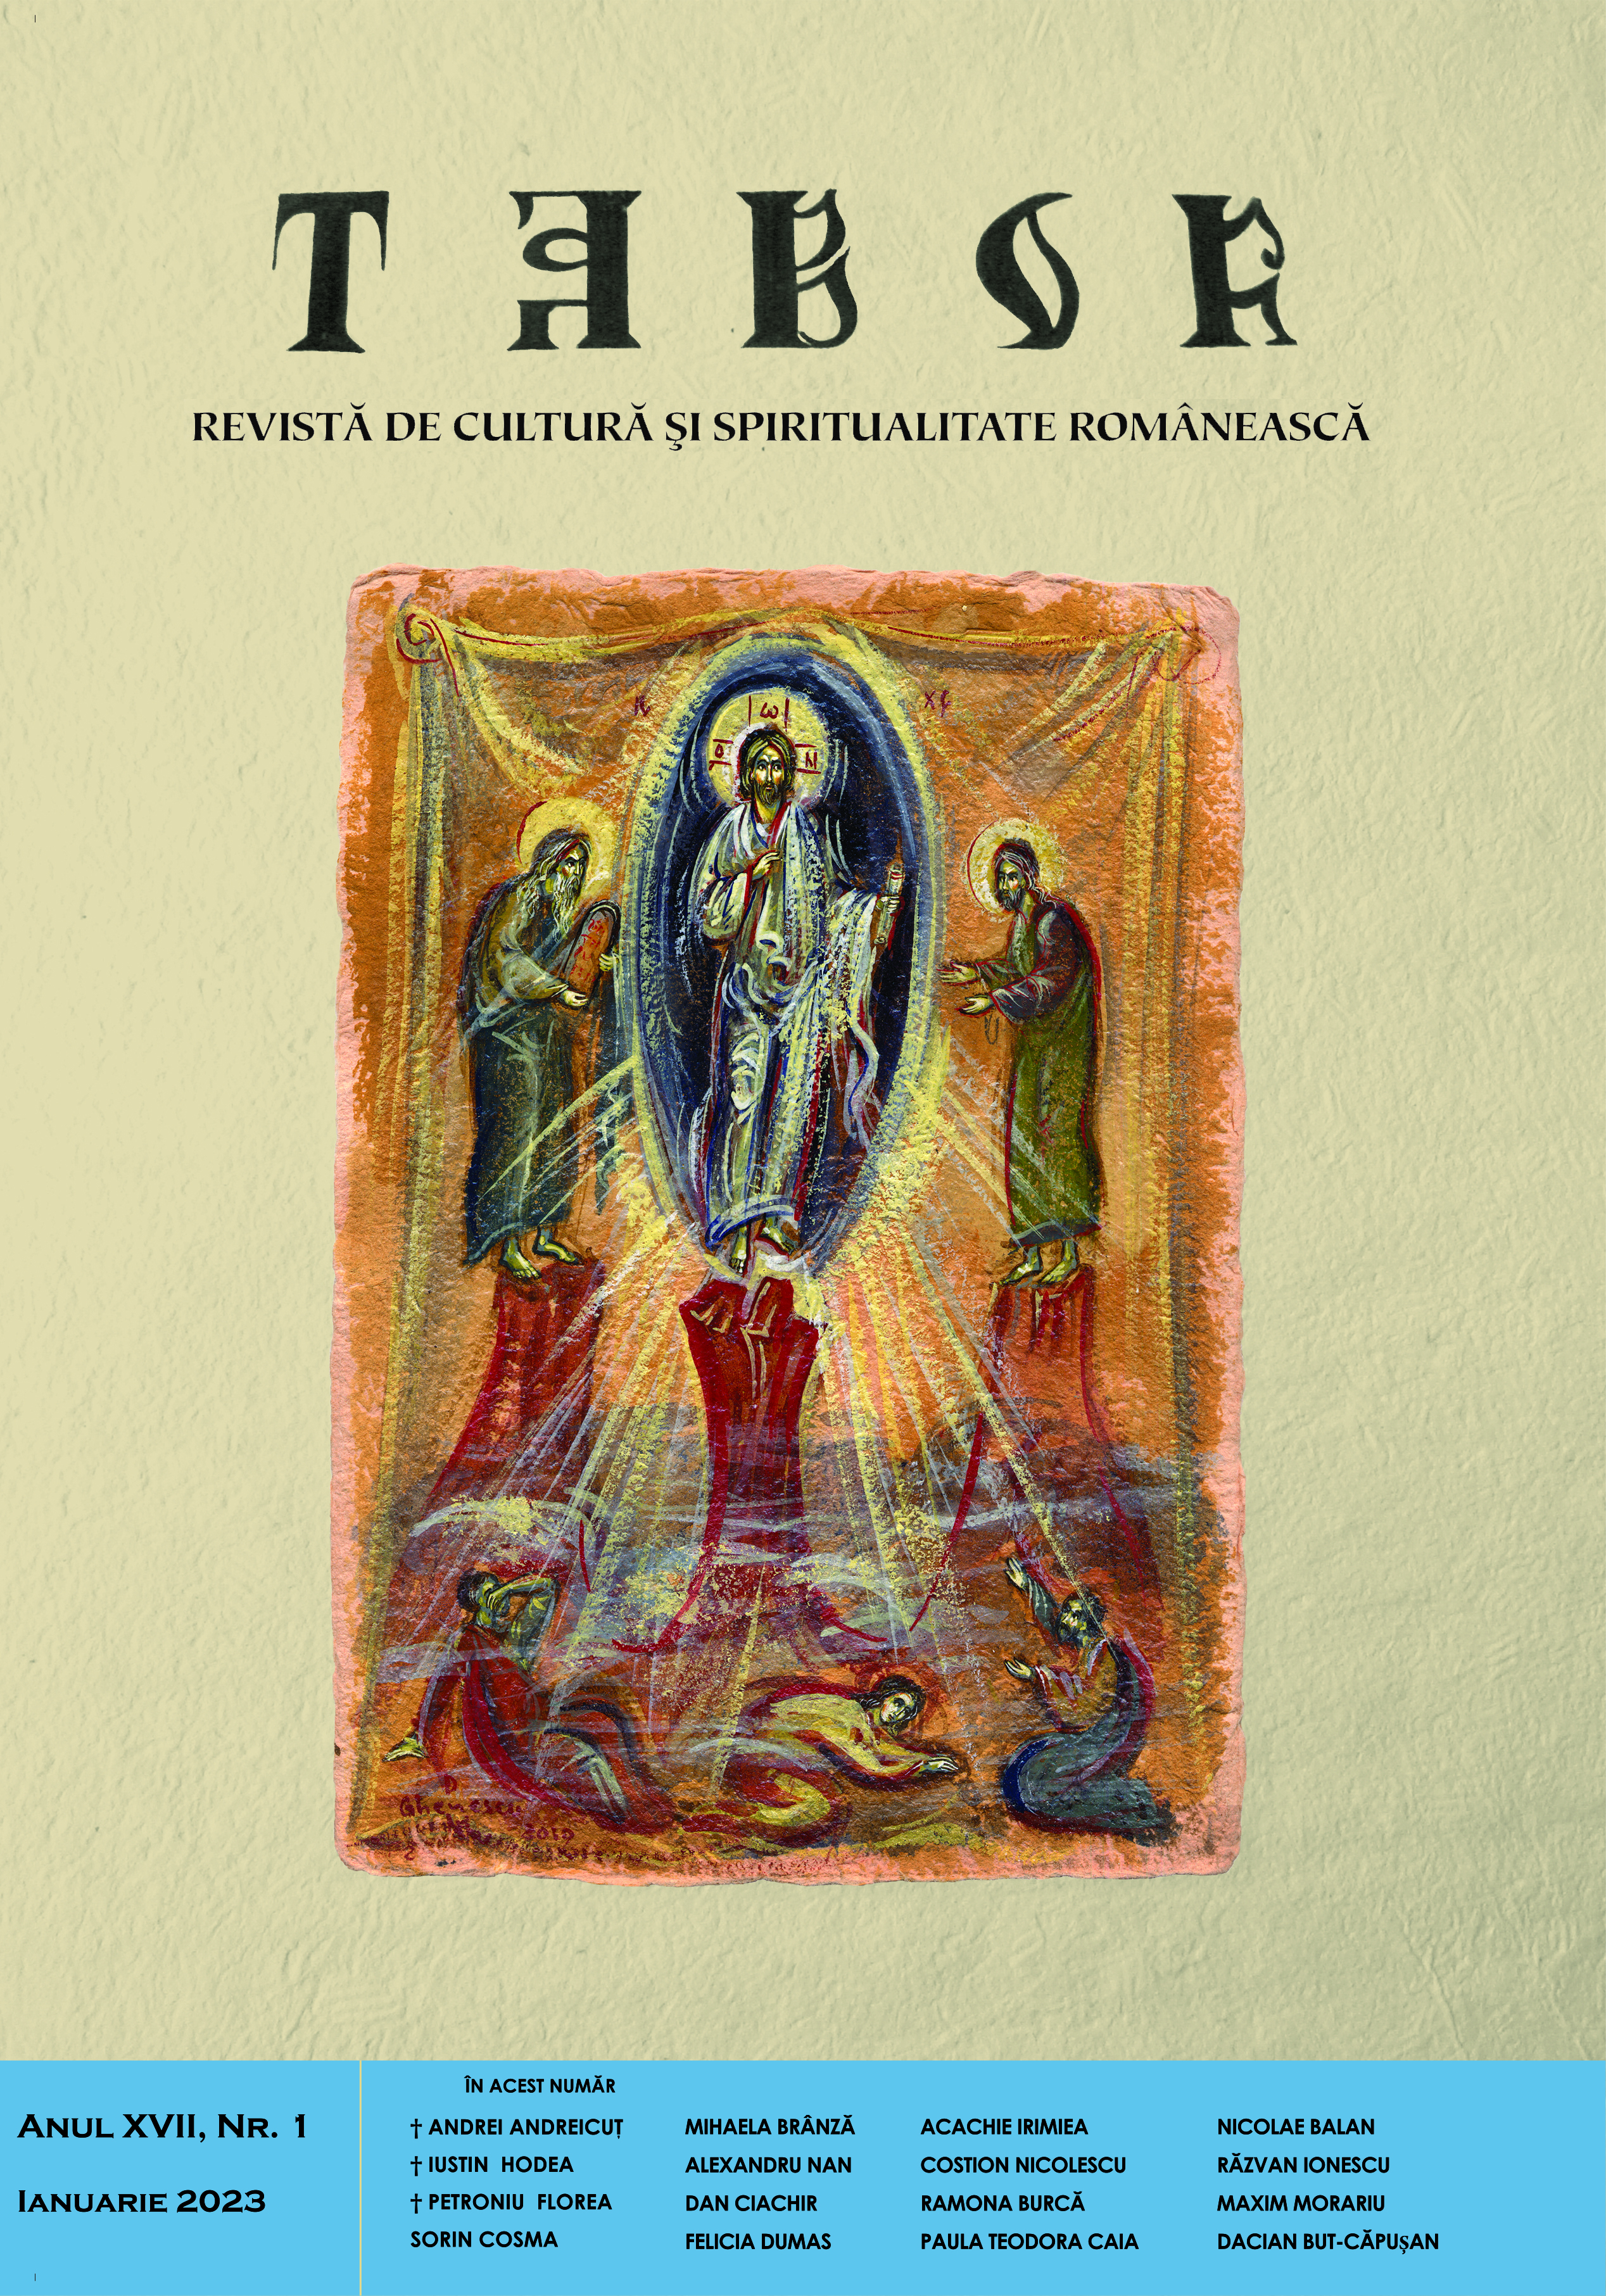 About Father Archimandrite Placide Deseille, five years after his passing away Cover Image